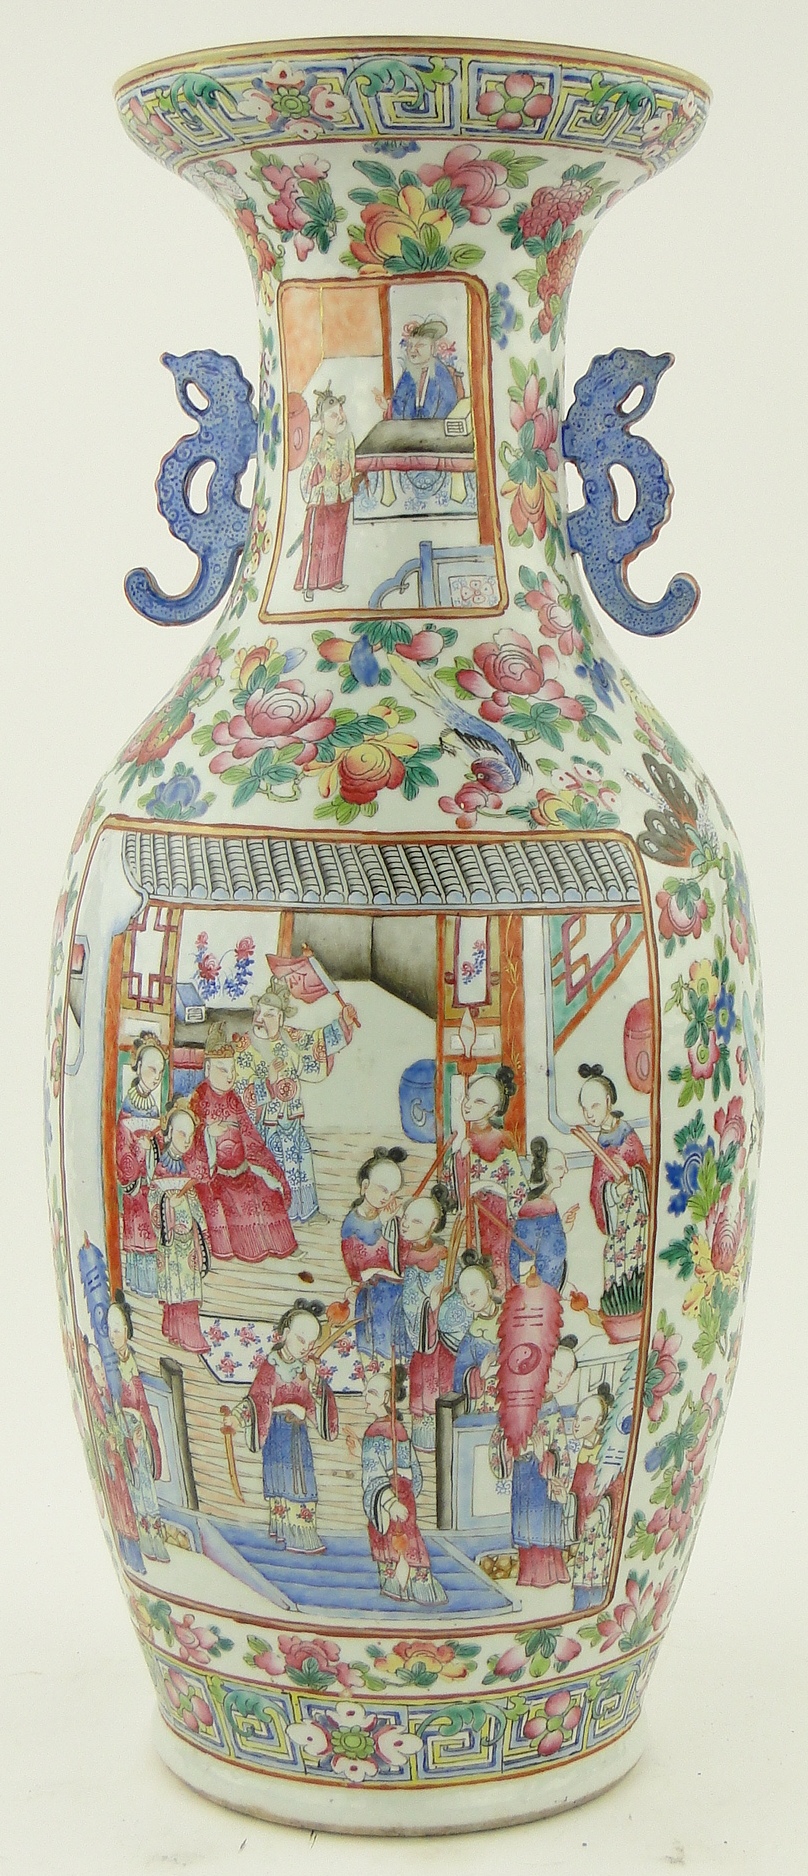 A Cantonese porcelain vase
with panels depicting figures, on butterfly and floral decorated ground, - Image 2 of 11